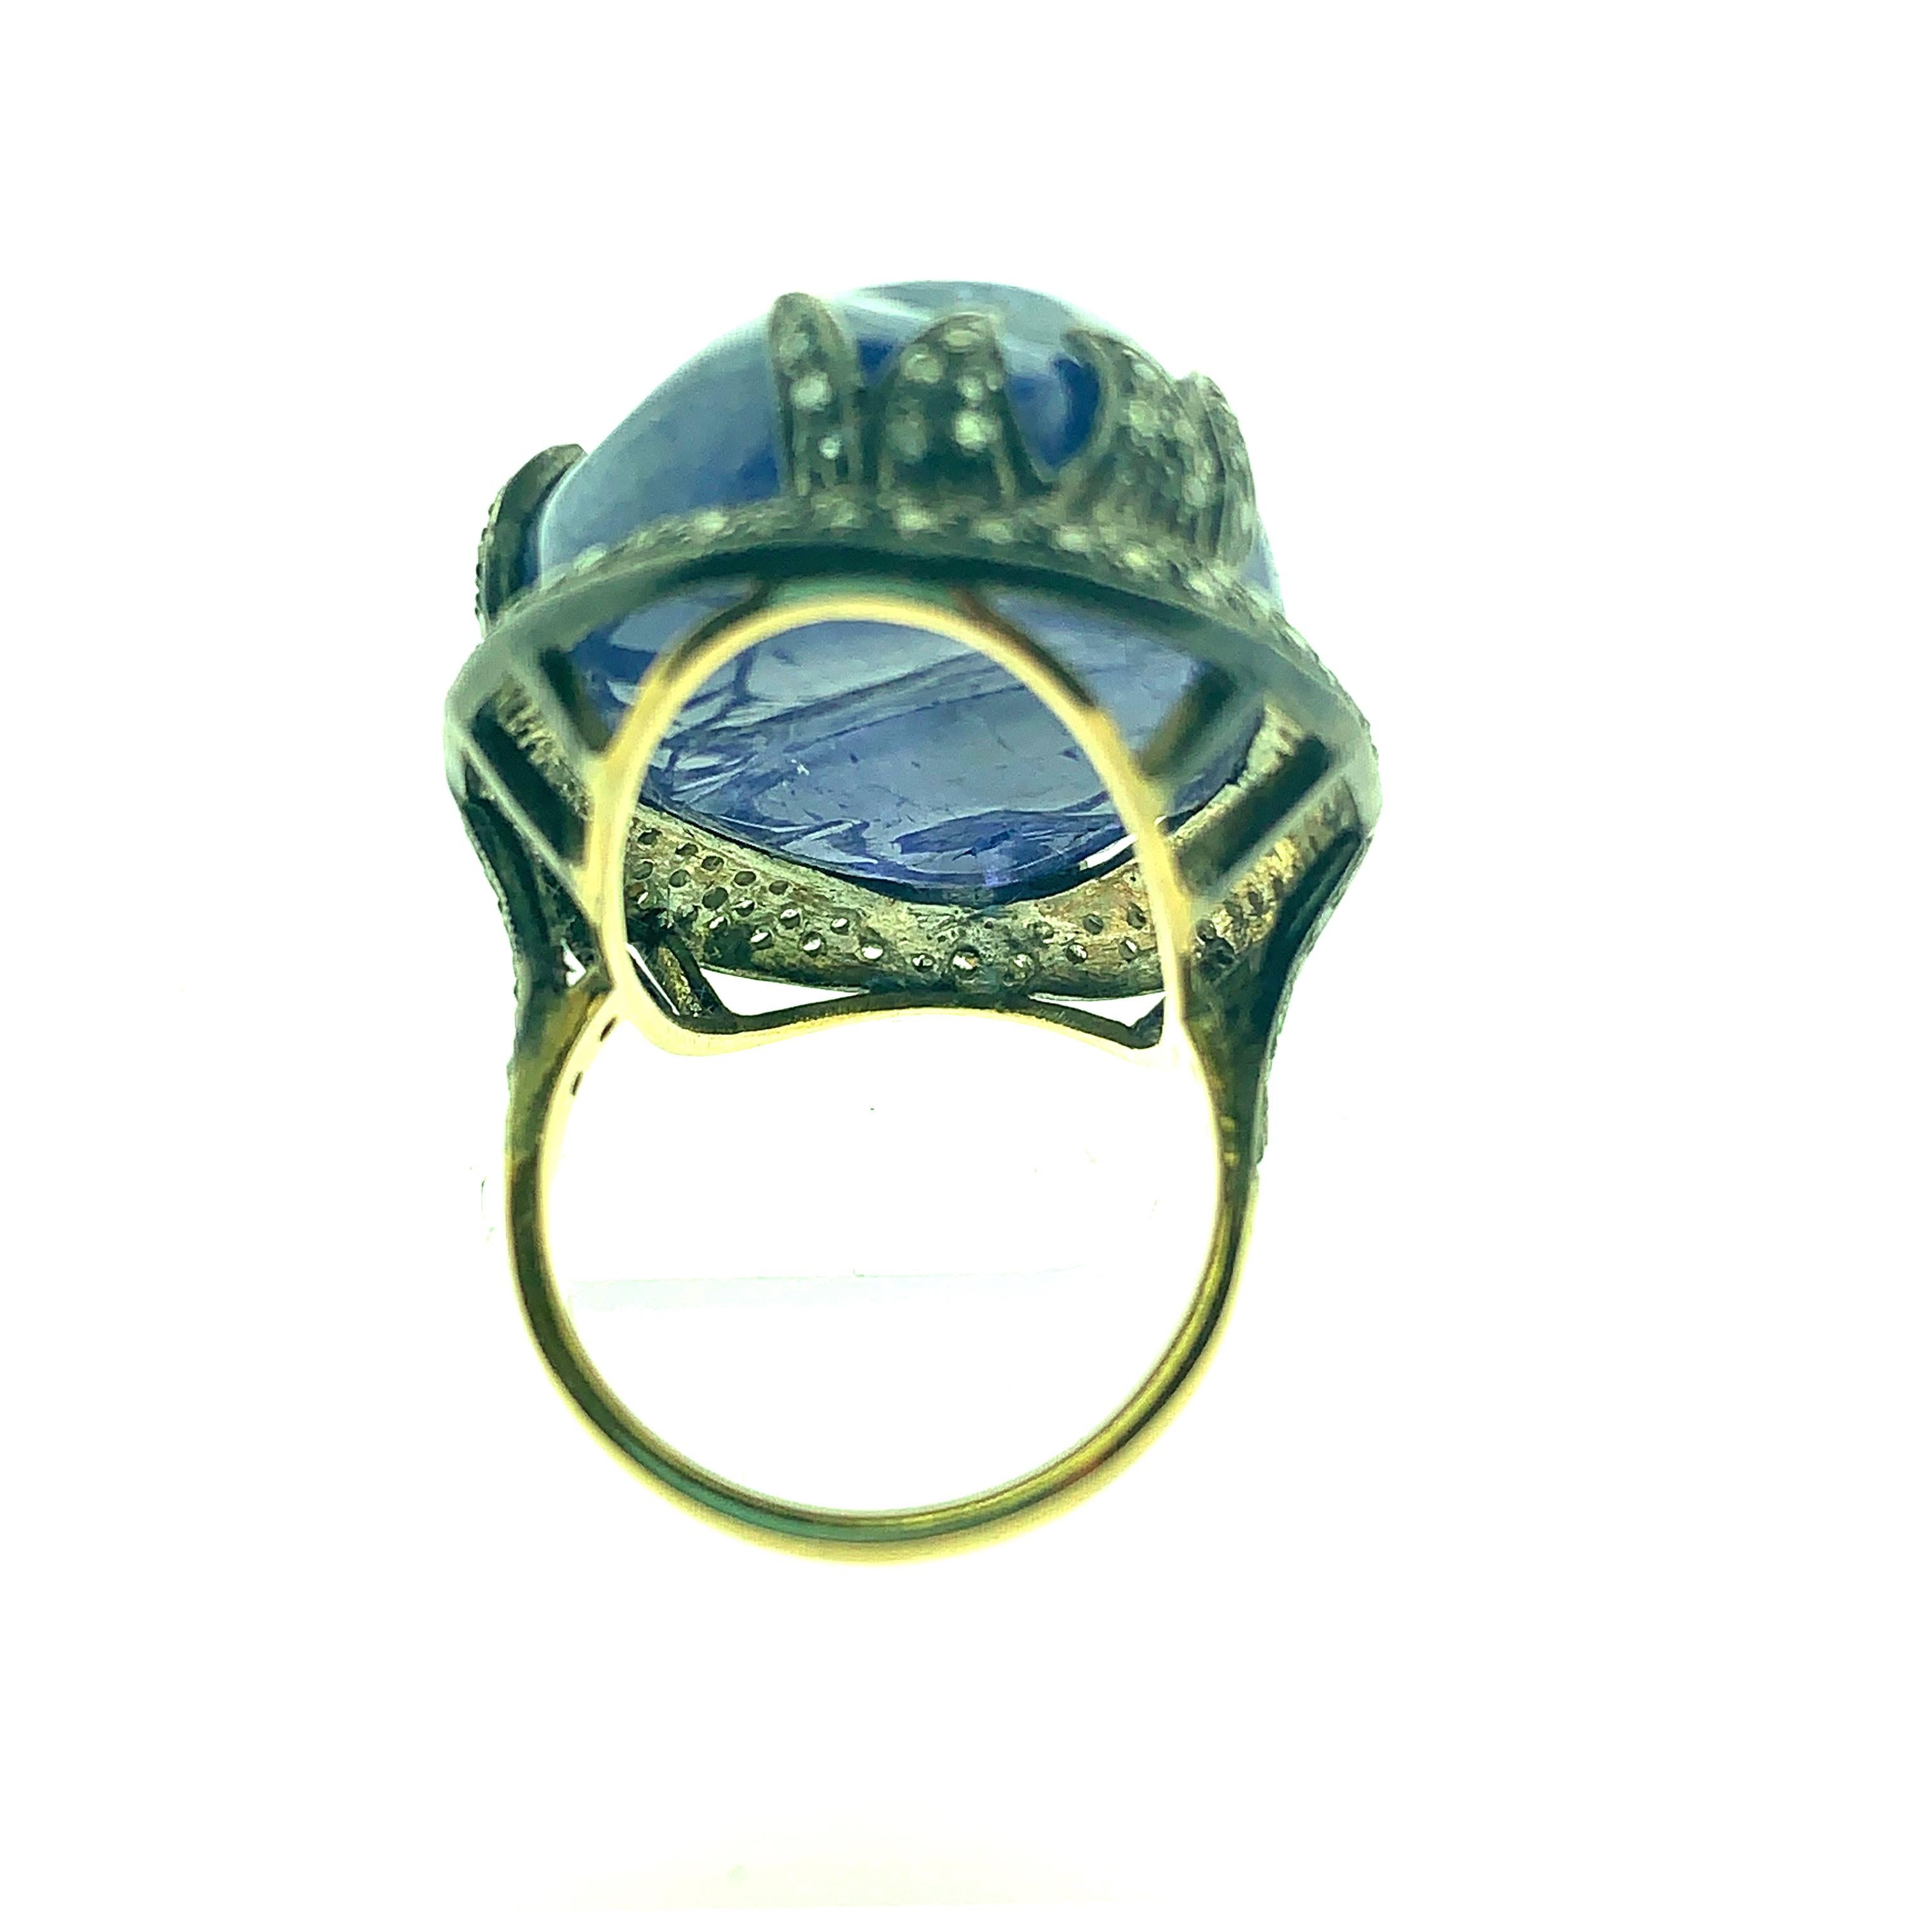 63.56 Carat Tanzanite 1.26 Carat Diamond Ring Oxidized Sterling Silver, 14K Gold In New Condition For Sale In New York, NY